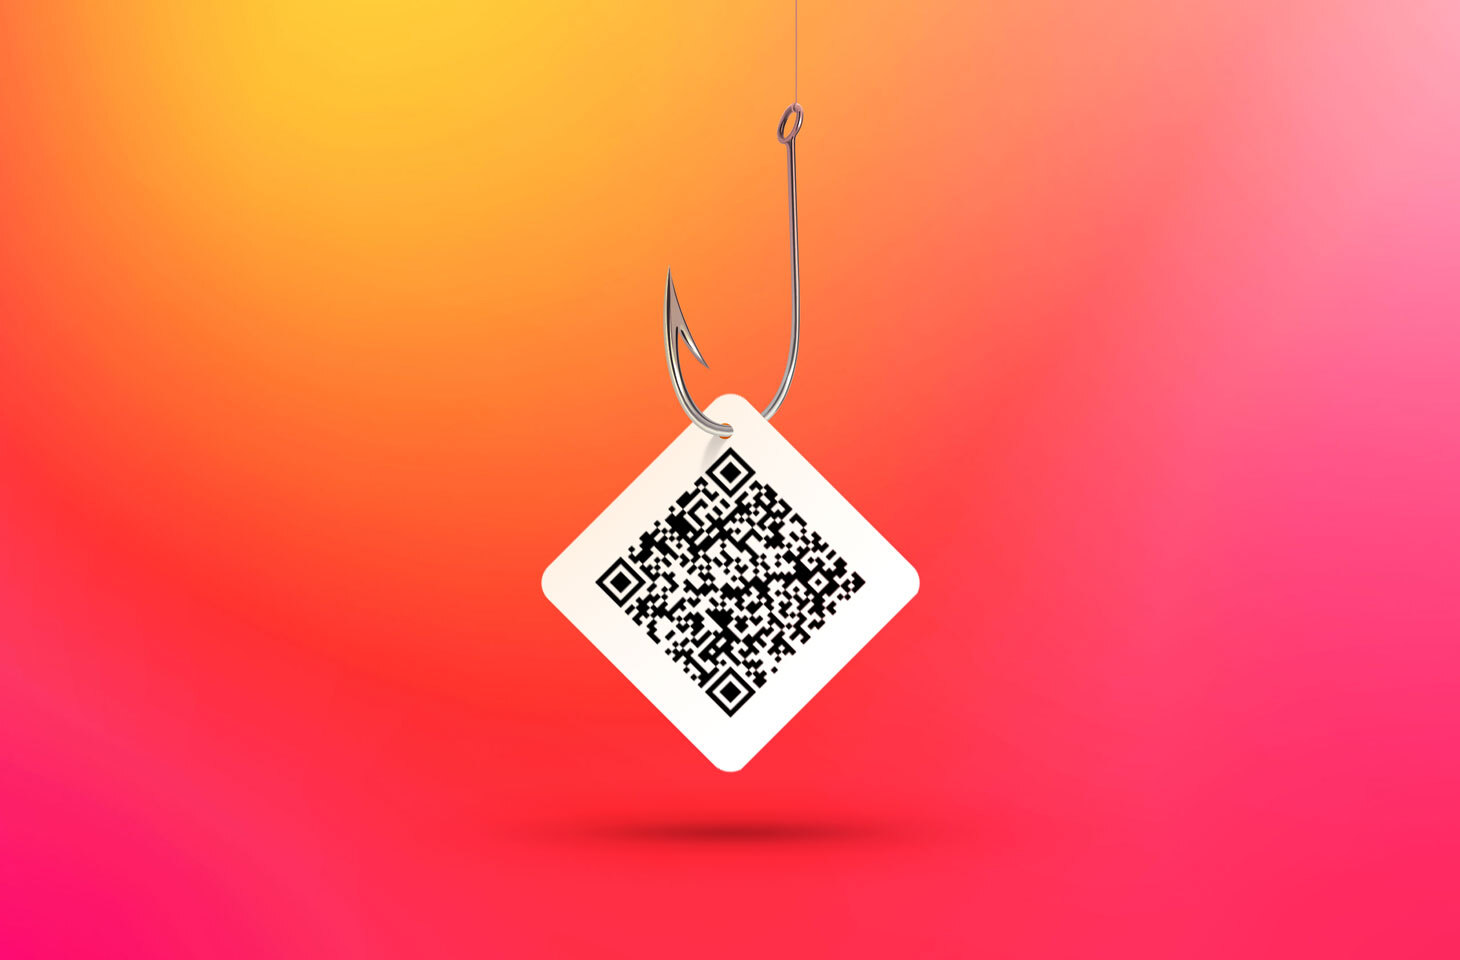 6.8 billion QR codes were scanned in 2023, how many were phishing?